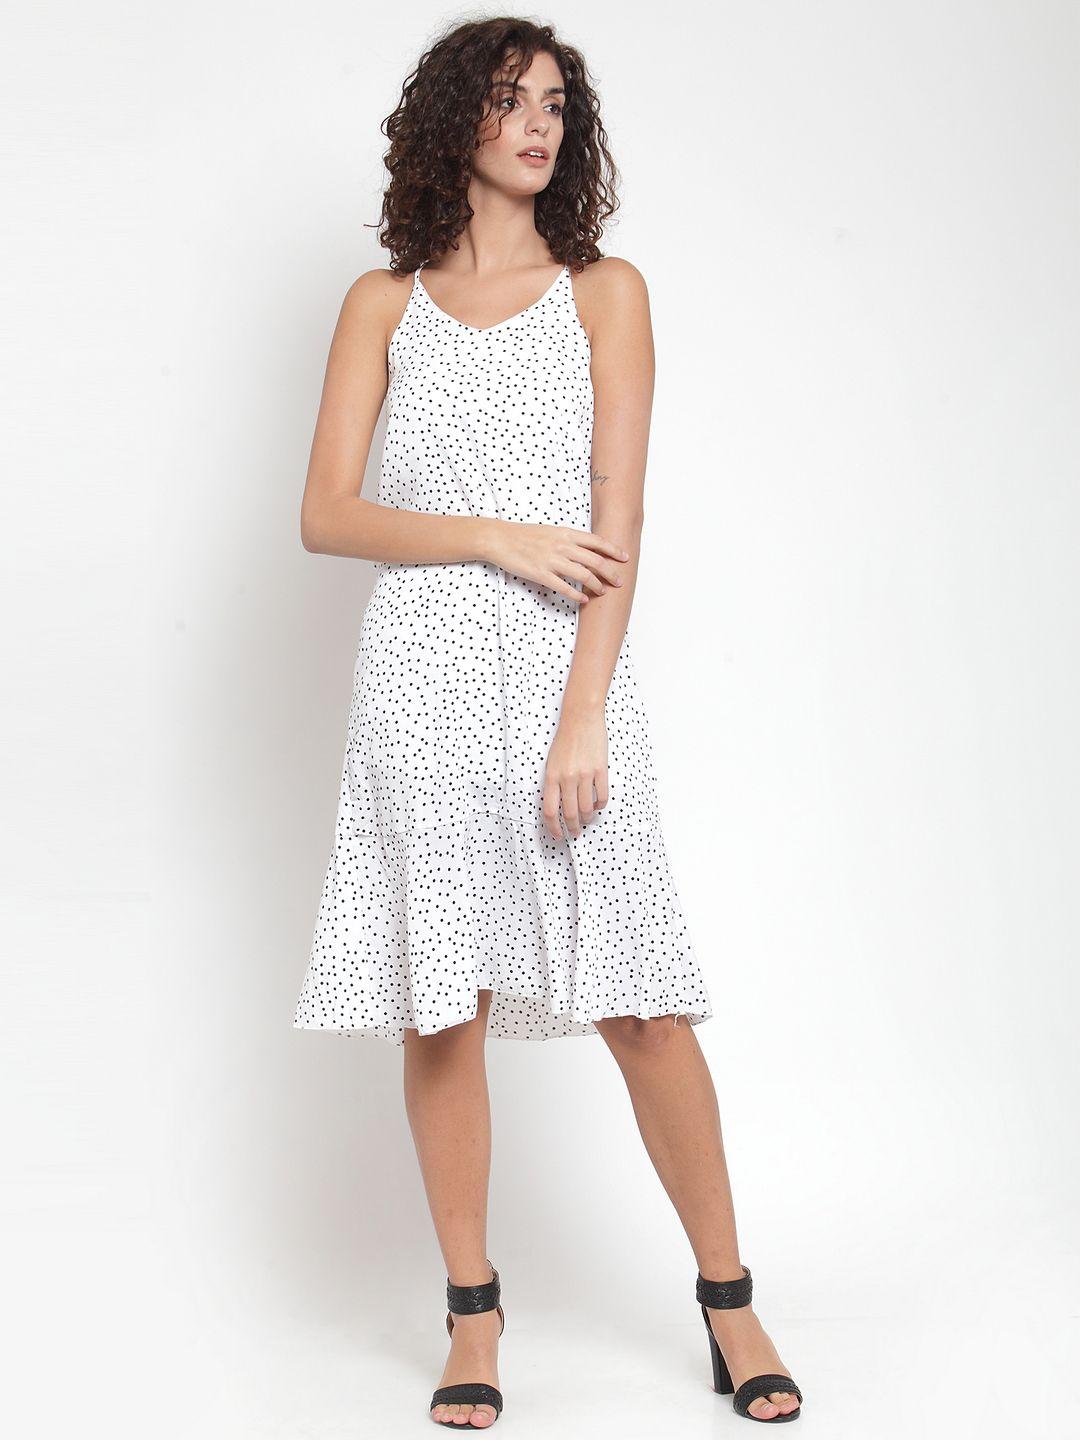 j style women white polka dots fit and flare dress